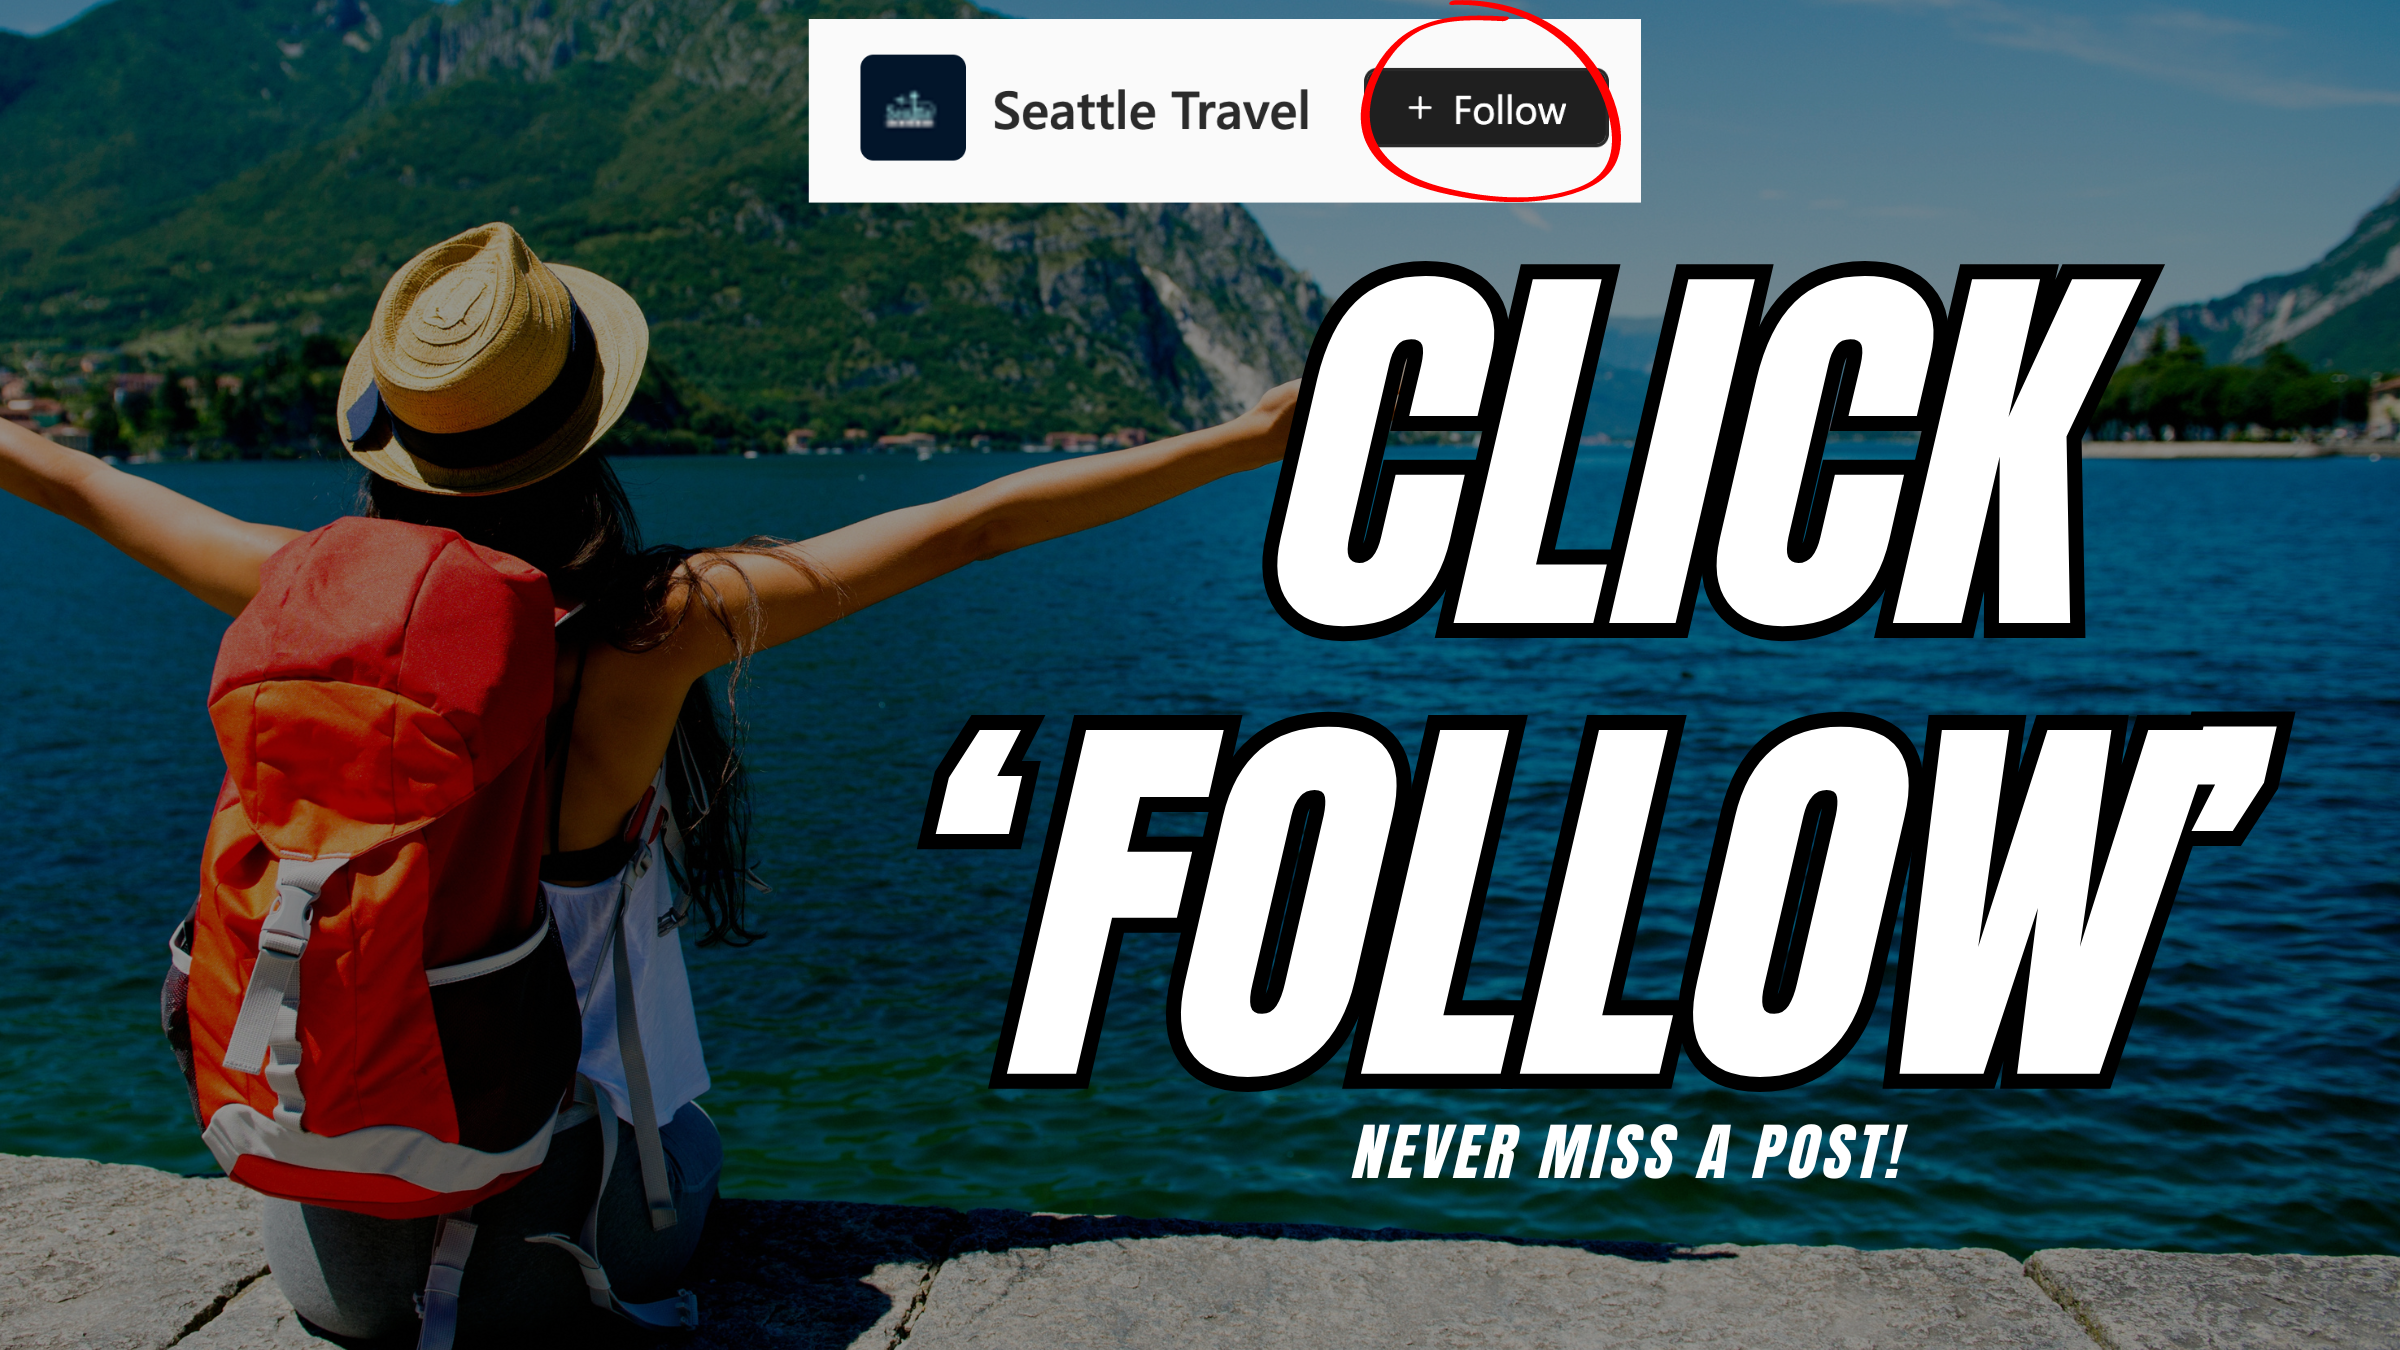 <p>To see the latest stories from Seattle Travel in your Microsoft Start feed or MSN homepage, don’t forget to scroll up and click the ‘Follow’ button!</p>